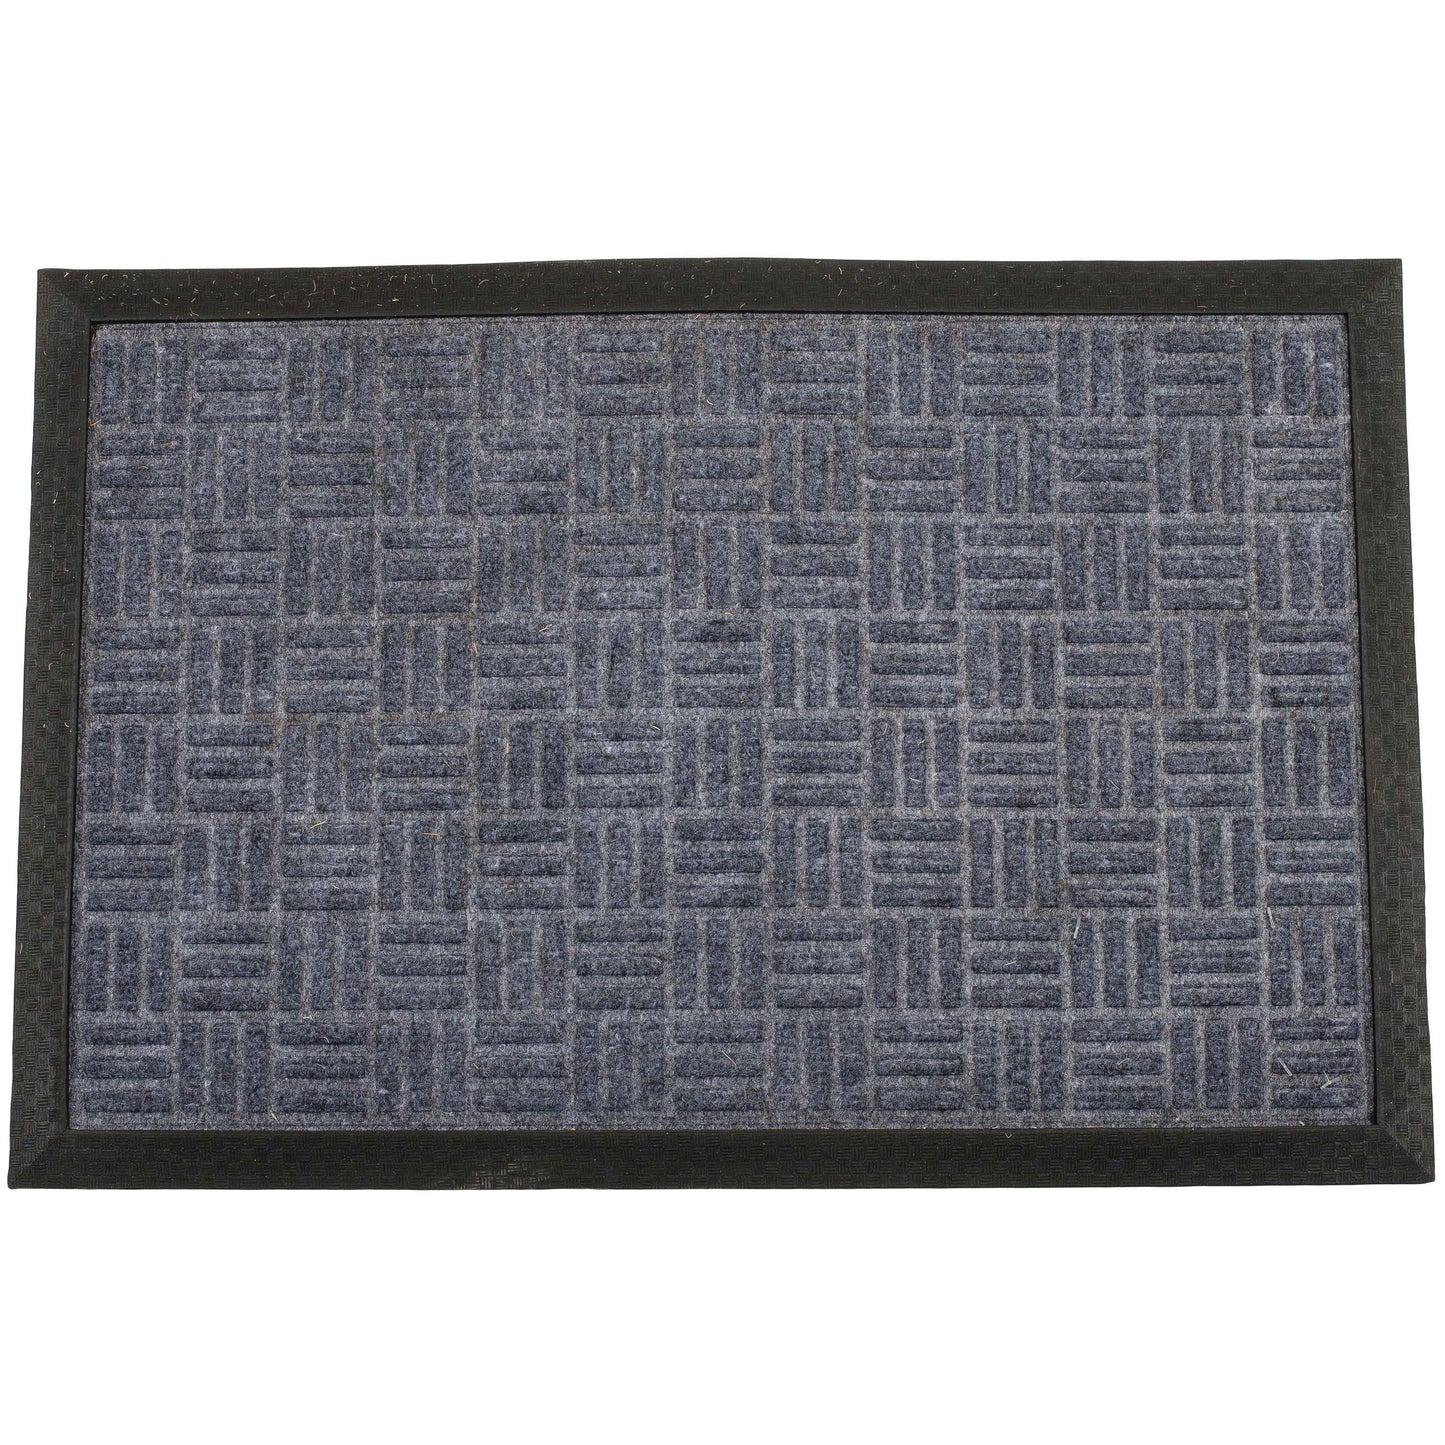 SWHF Premium PP and Rubber Door and Floor Mat : Virgin Rubber and Extremely Durable : Grey Criscross - SWHF